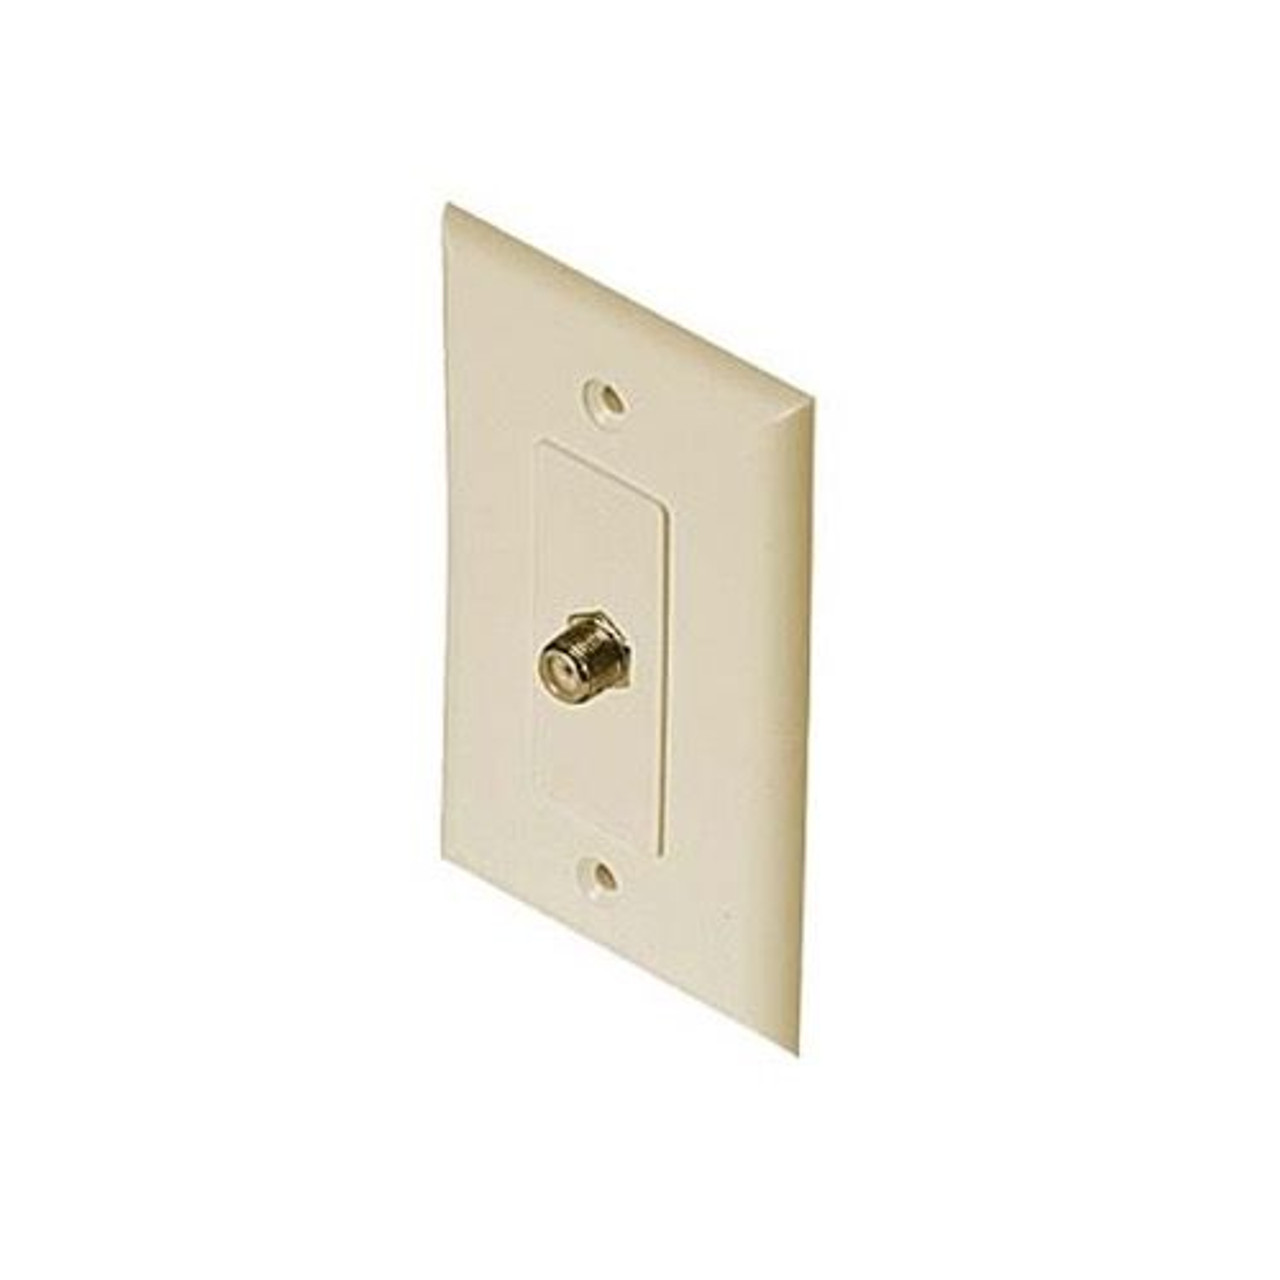 Steren 200-266IV Wall Plate F Jack Ivory 1 GHz F-81 HDTV Video Wall Plate 75 Ohm 1 Pack TV Aerial Antenna Plug, Flush Mount Female Outlet Connector, Part # 200266-IV